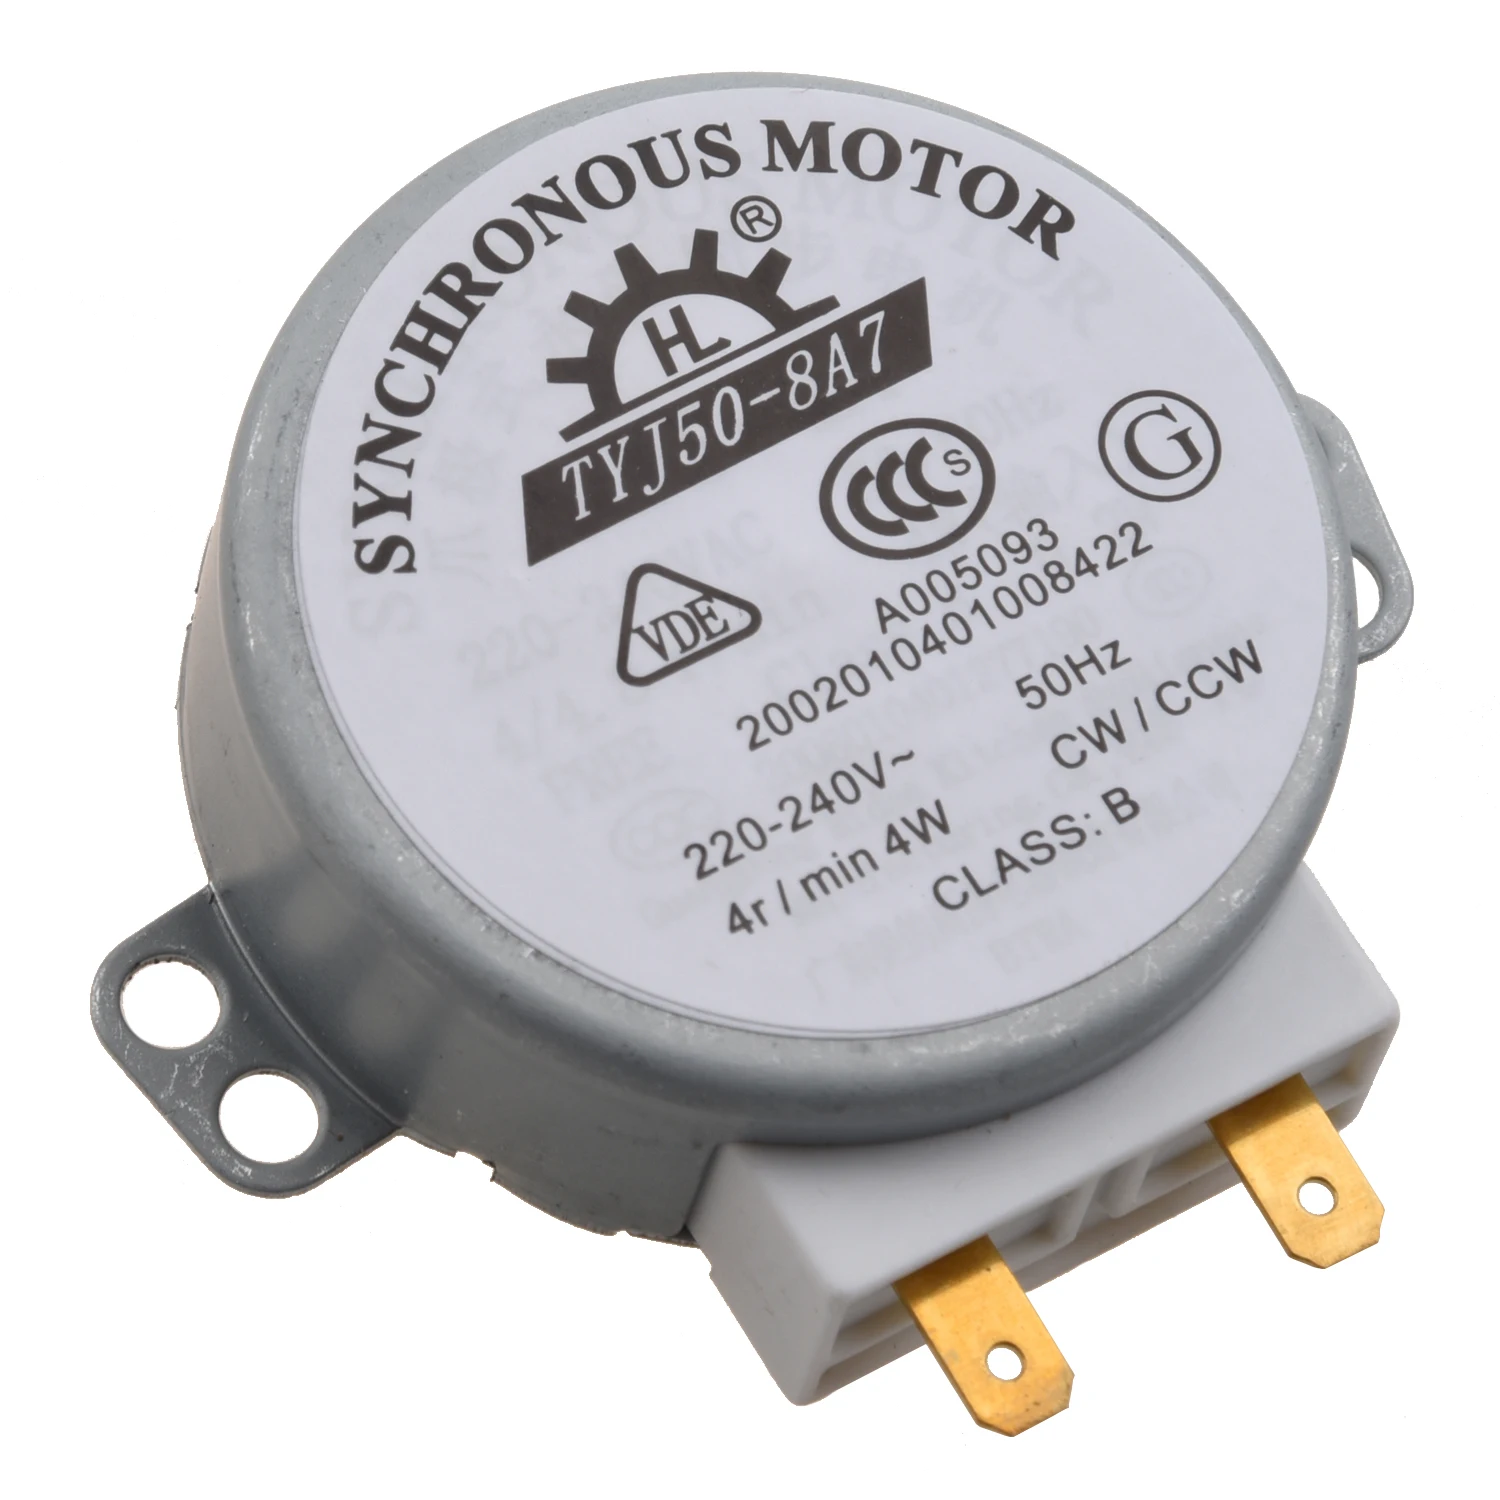 CW/CCW Turntable Microwave Oven Synchronous Motor AC 220-240V 4RPM 4W Uomtj 